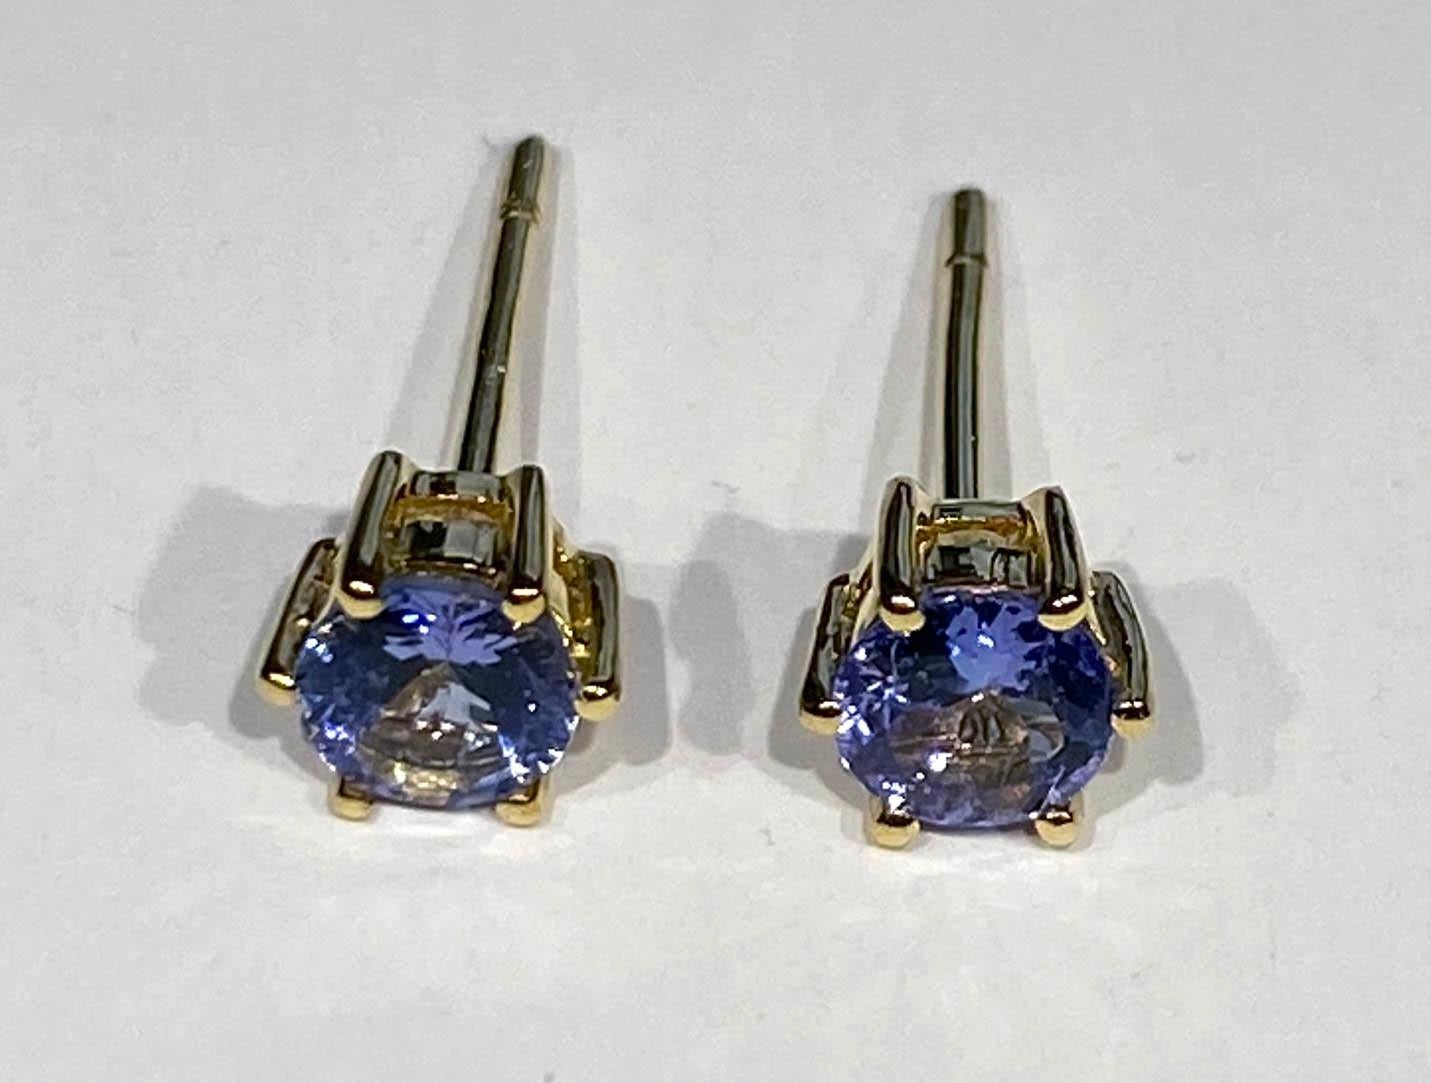 Tanzanite Stud Earrings set in 14kt Yellow Gold For Sale 4